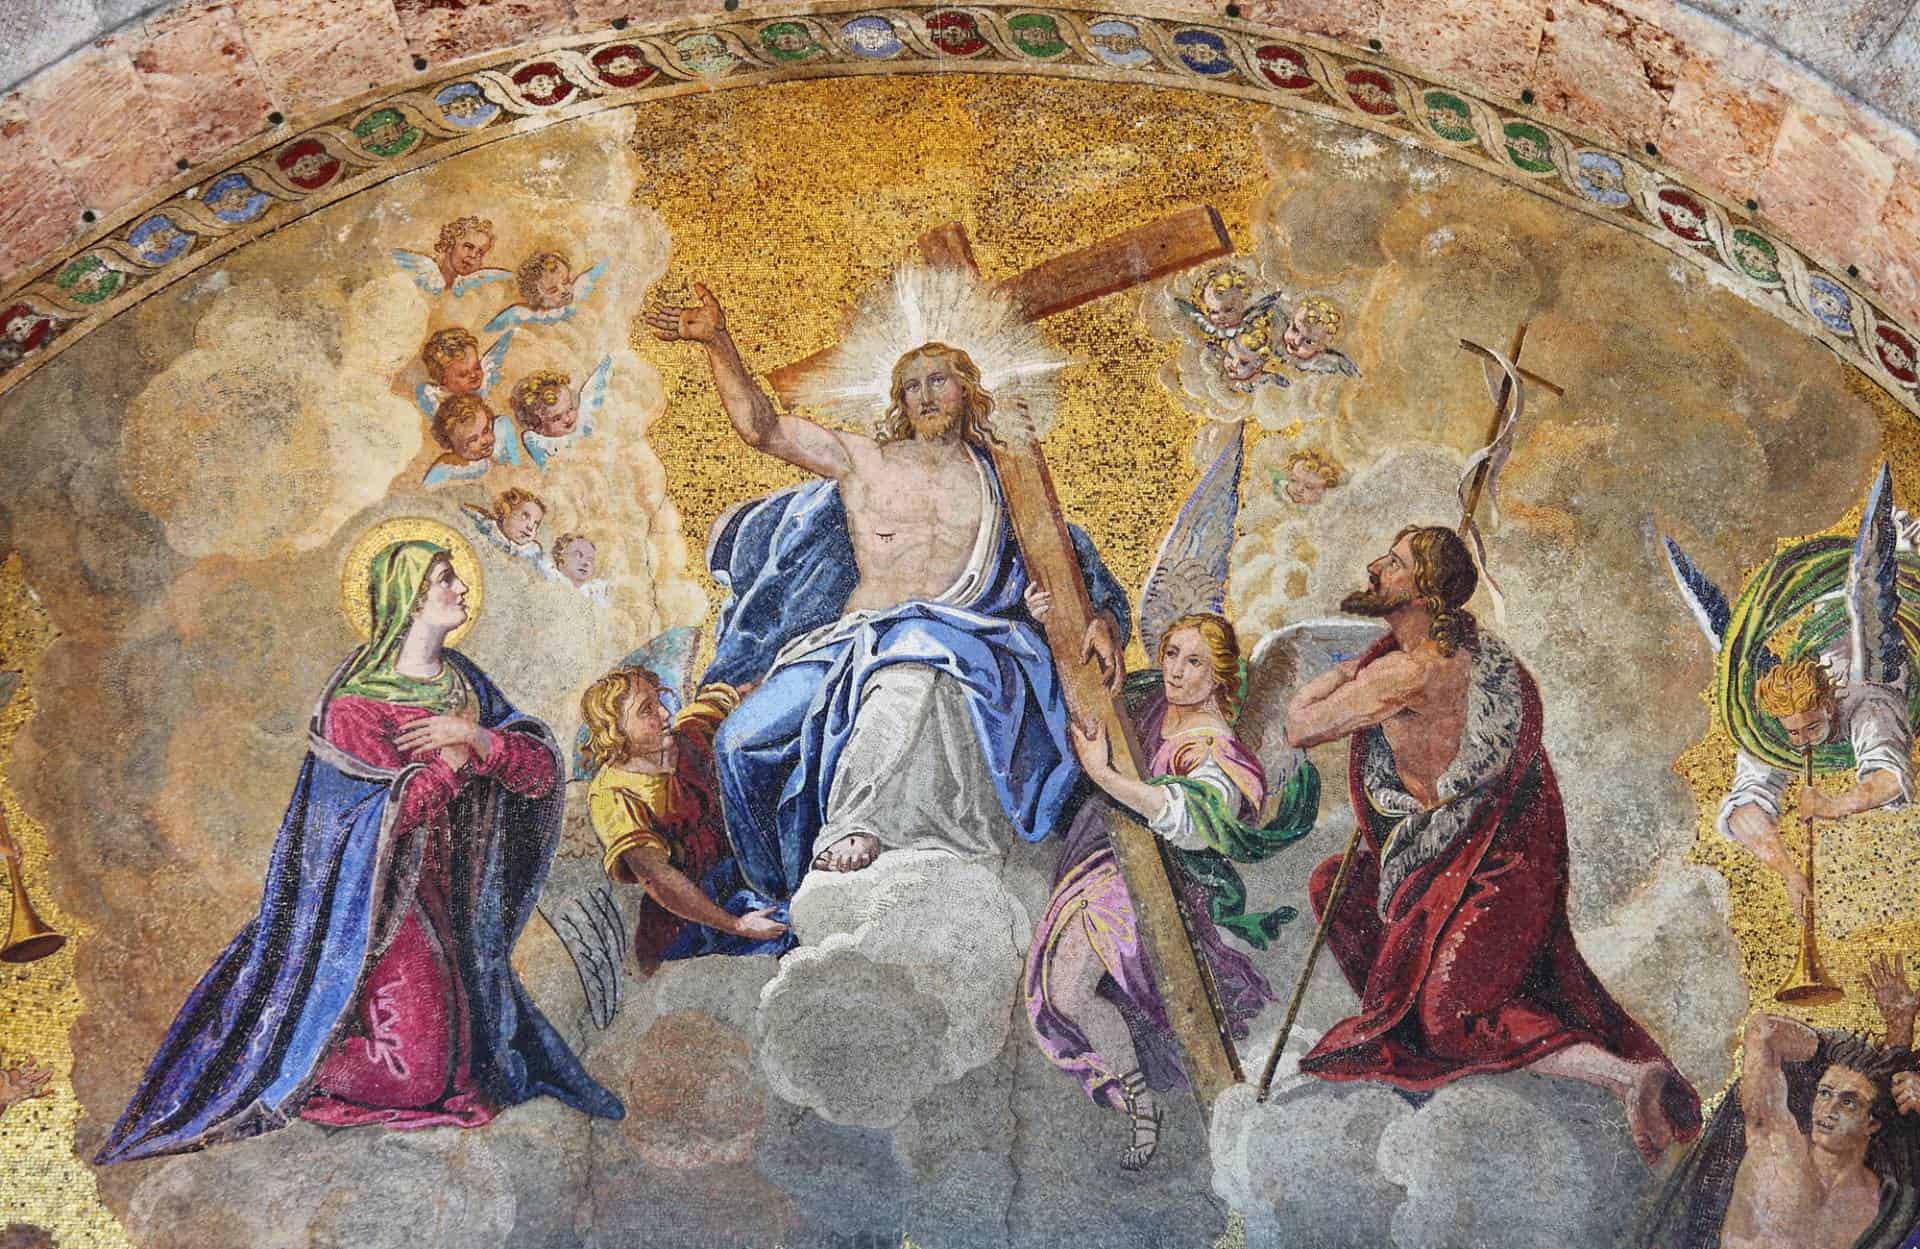 Mosaic depicting the Ascension of Jesus Christ in Saint Mark's Basilica in Venice, Italy.